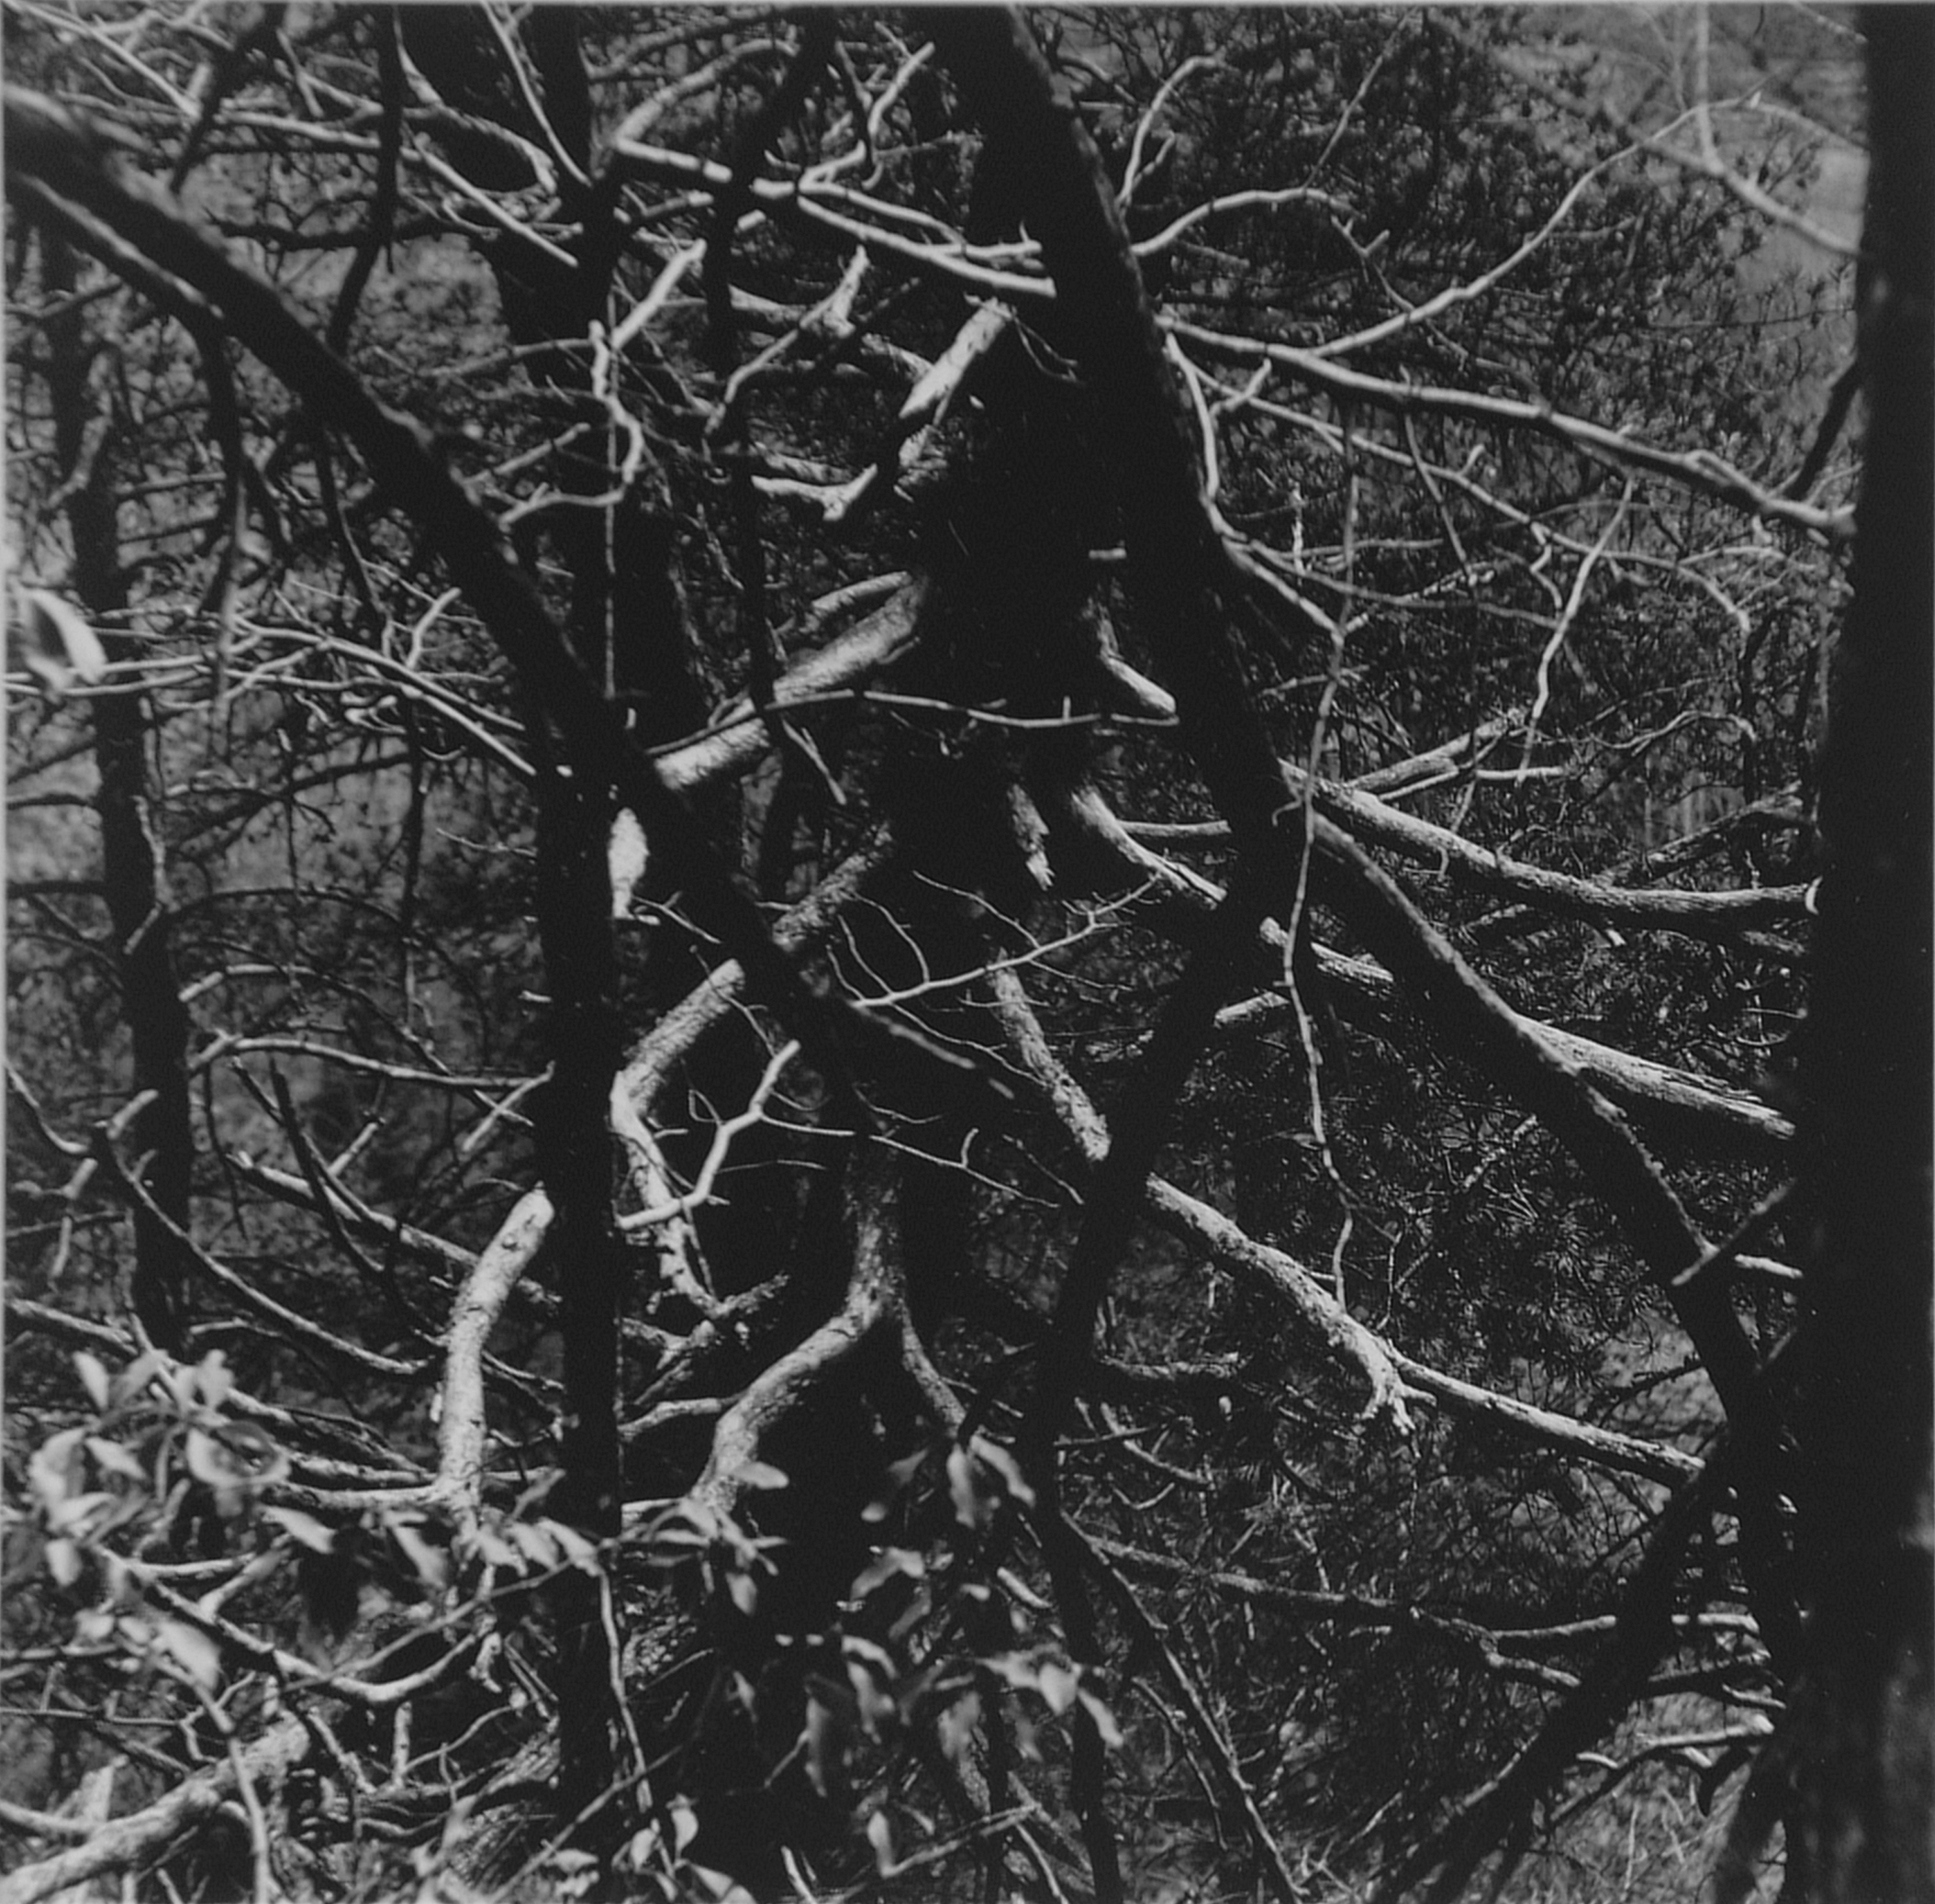 Untitled (Red River Gorge #48: Inverted Tree)